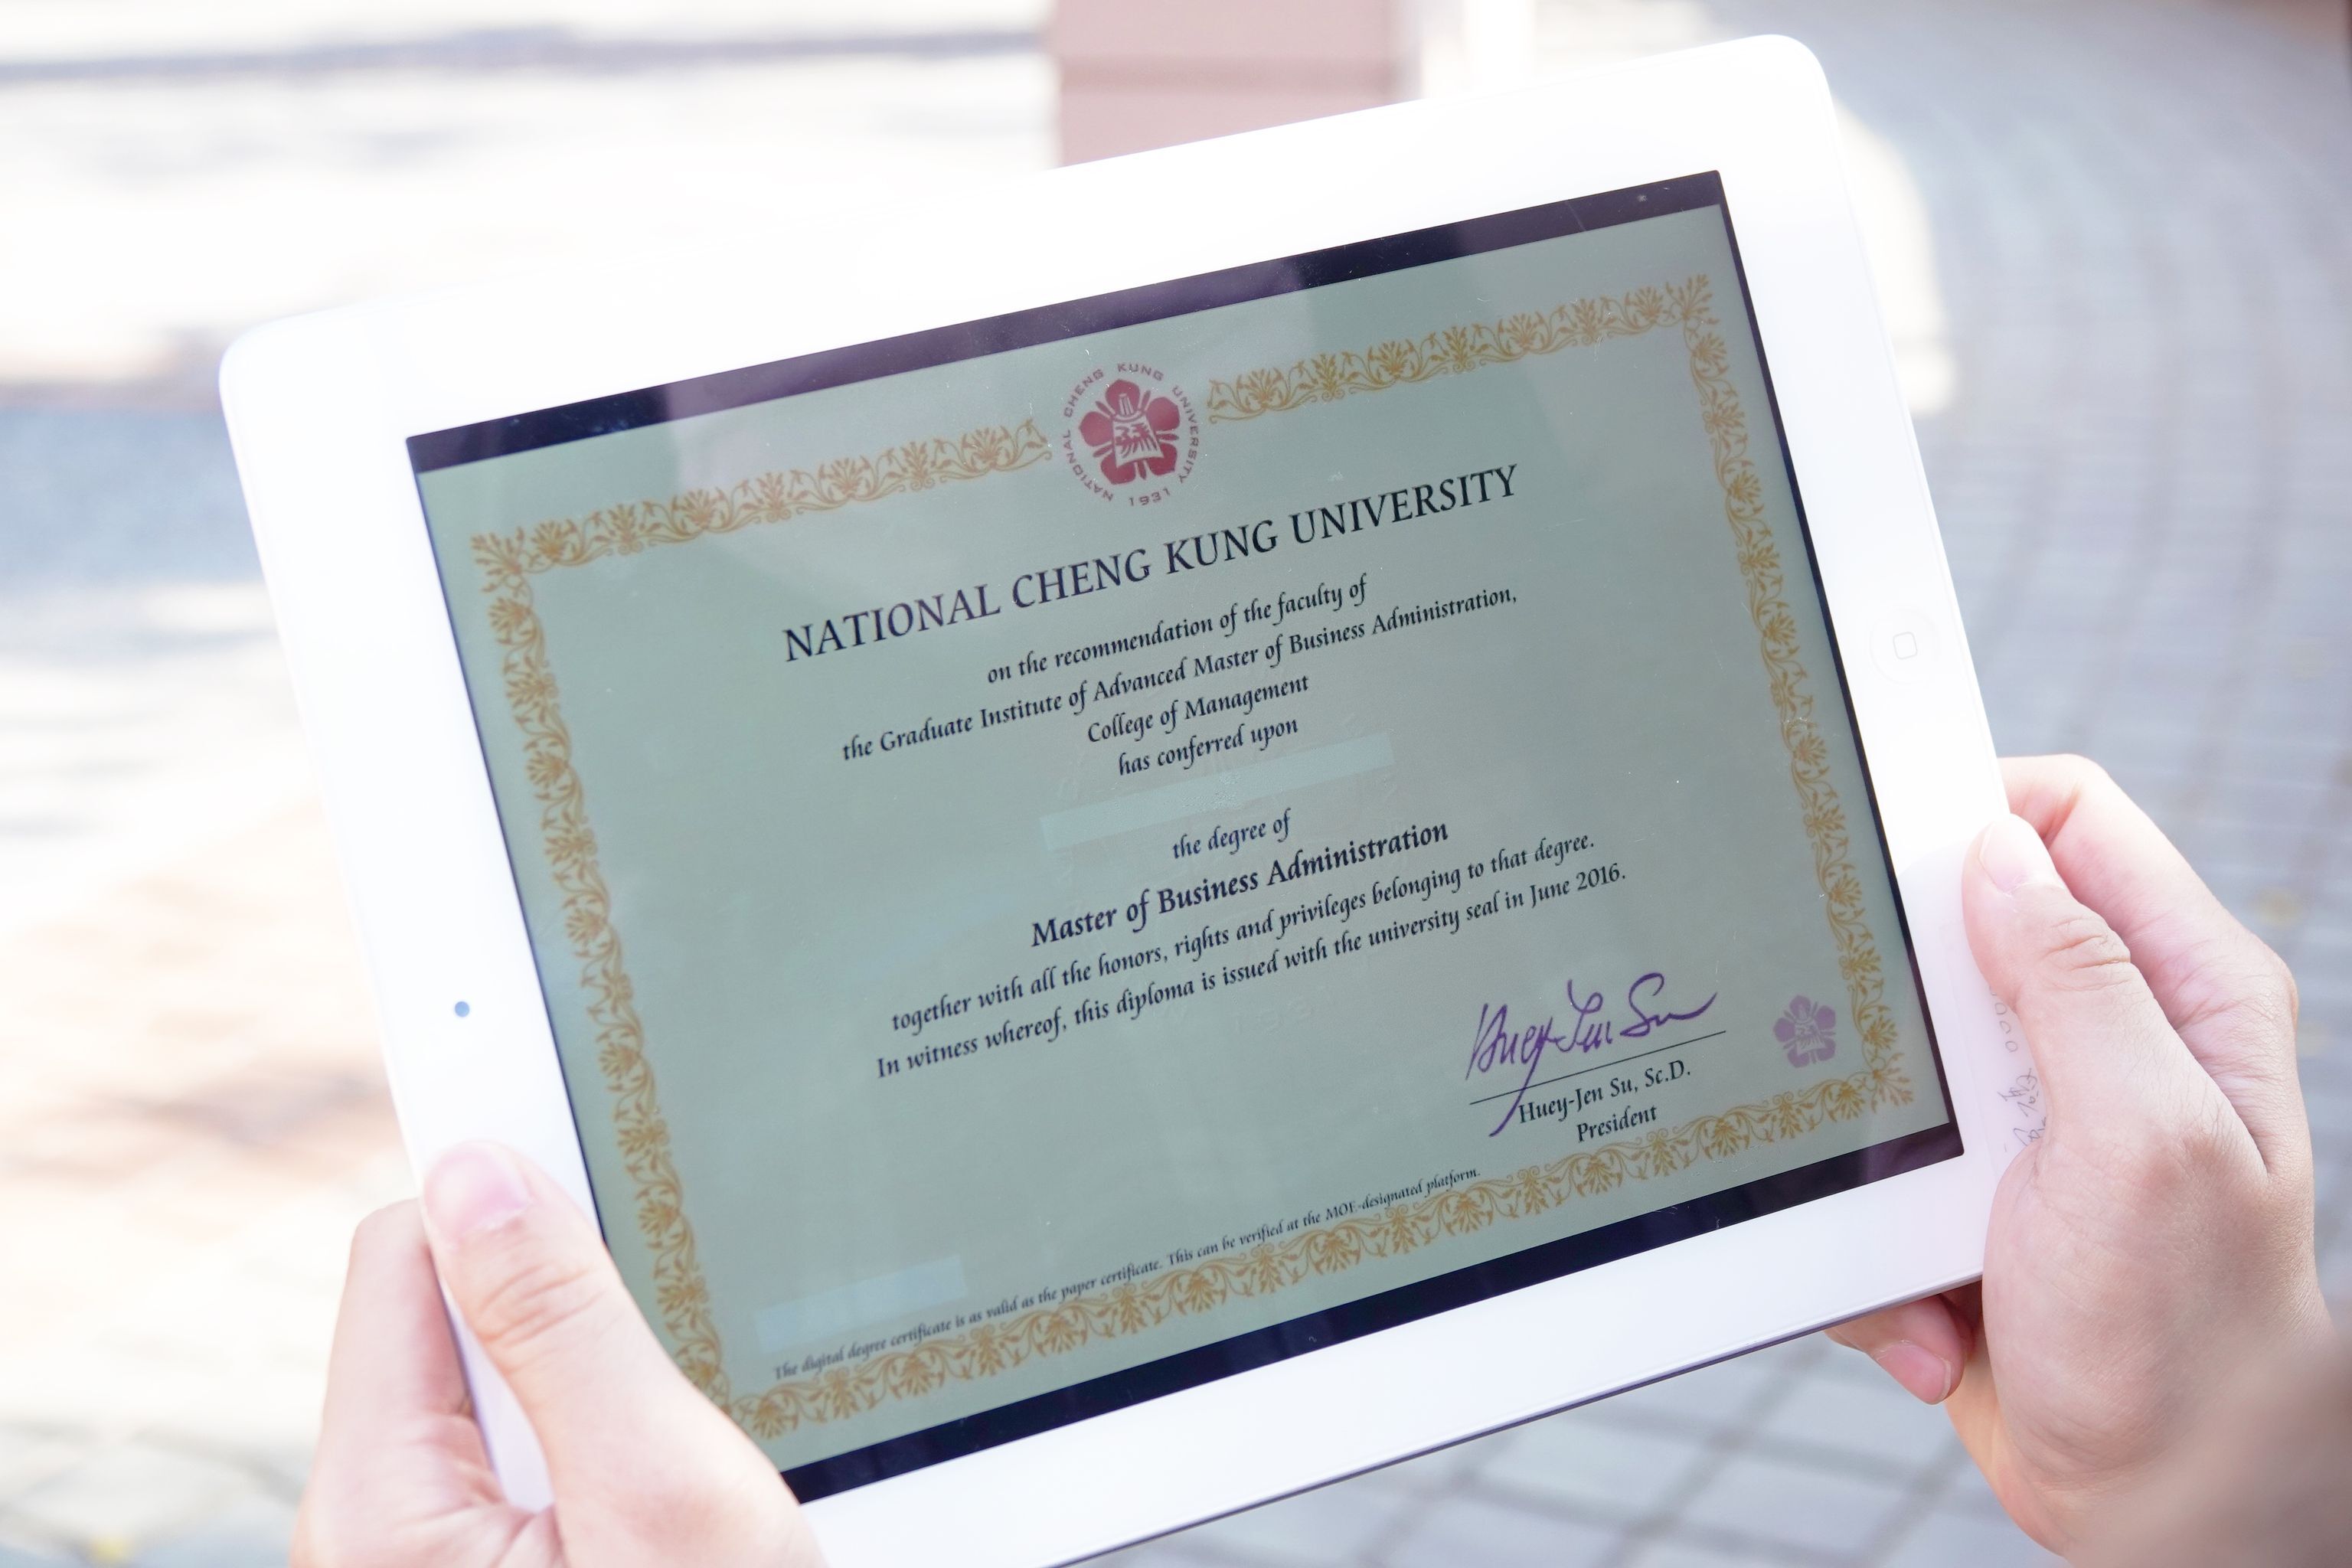 20 colleges are expected to employ digital certificate issuing system developed by NCKU by this February